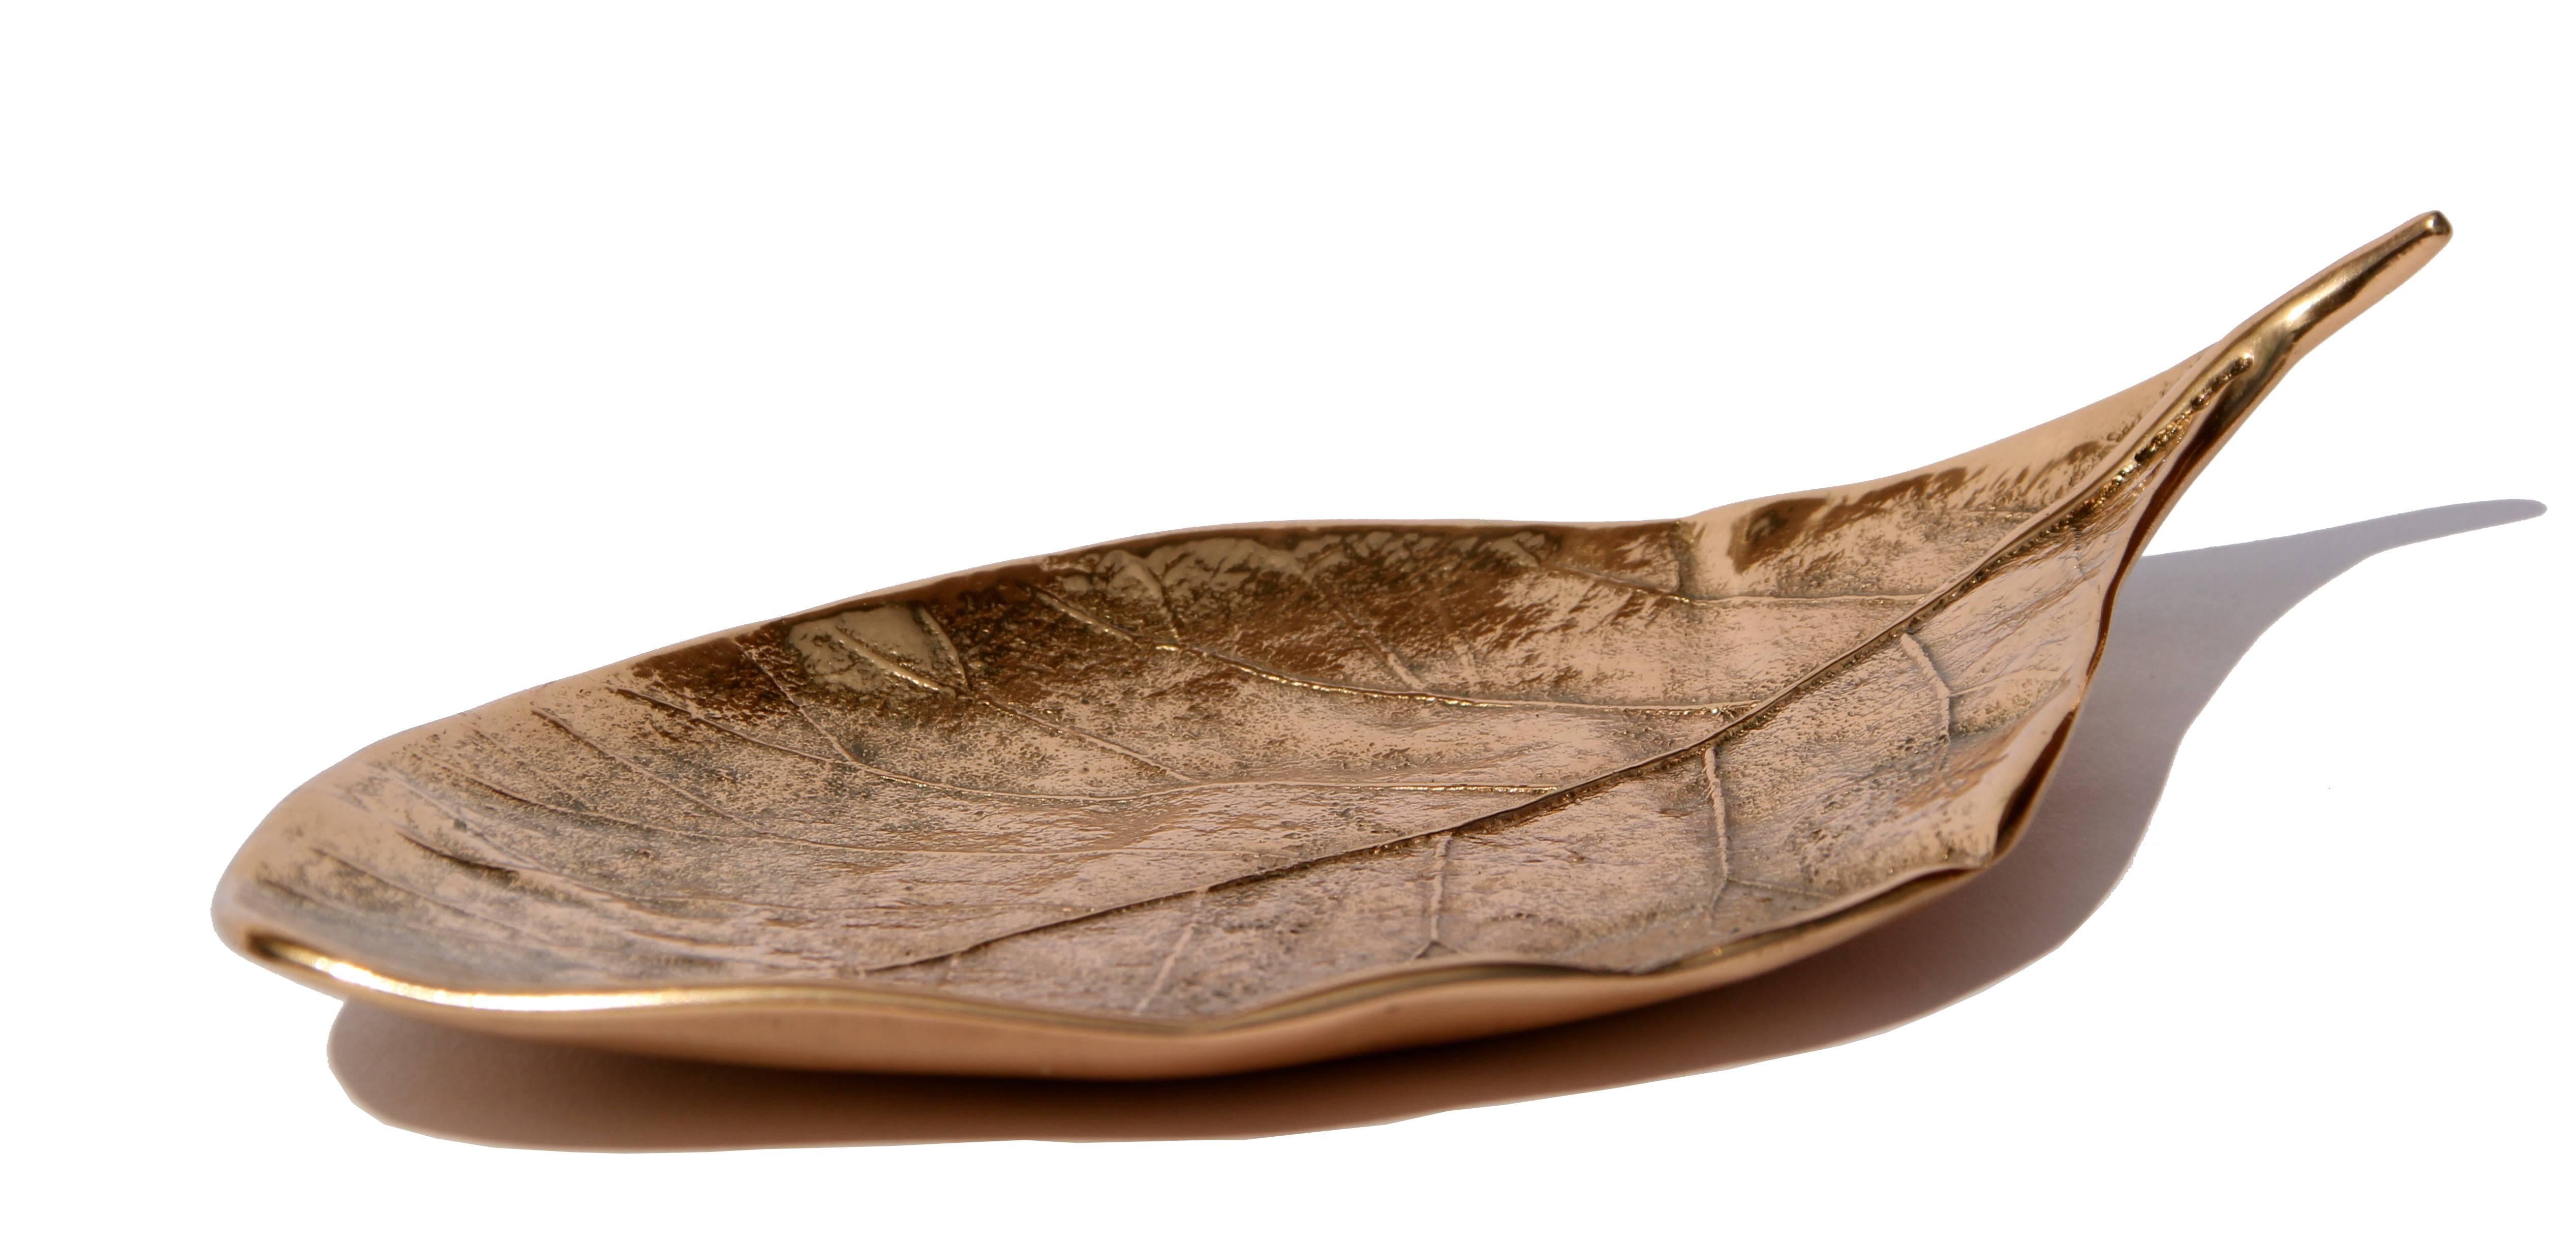 Each of these splendid bronze leaves is handmade individually with incredible detail. Cast using very traditional techniques, they are polished capturing the raw finish of this noble material, and impressively highlighting every vein and